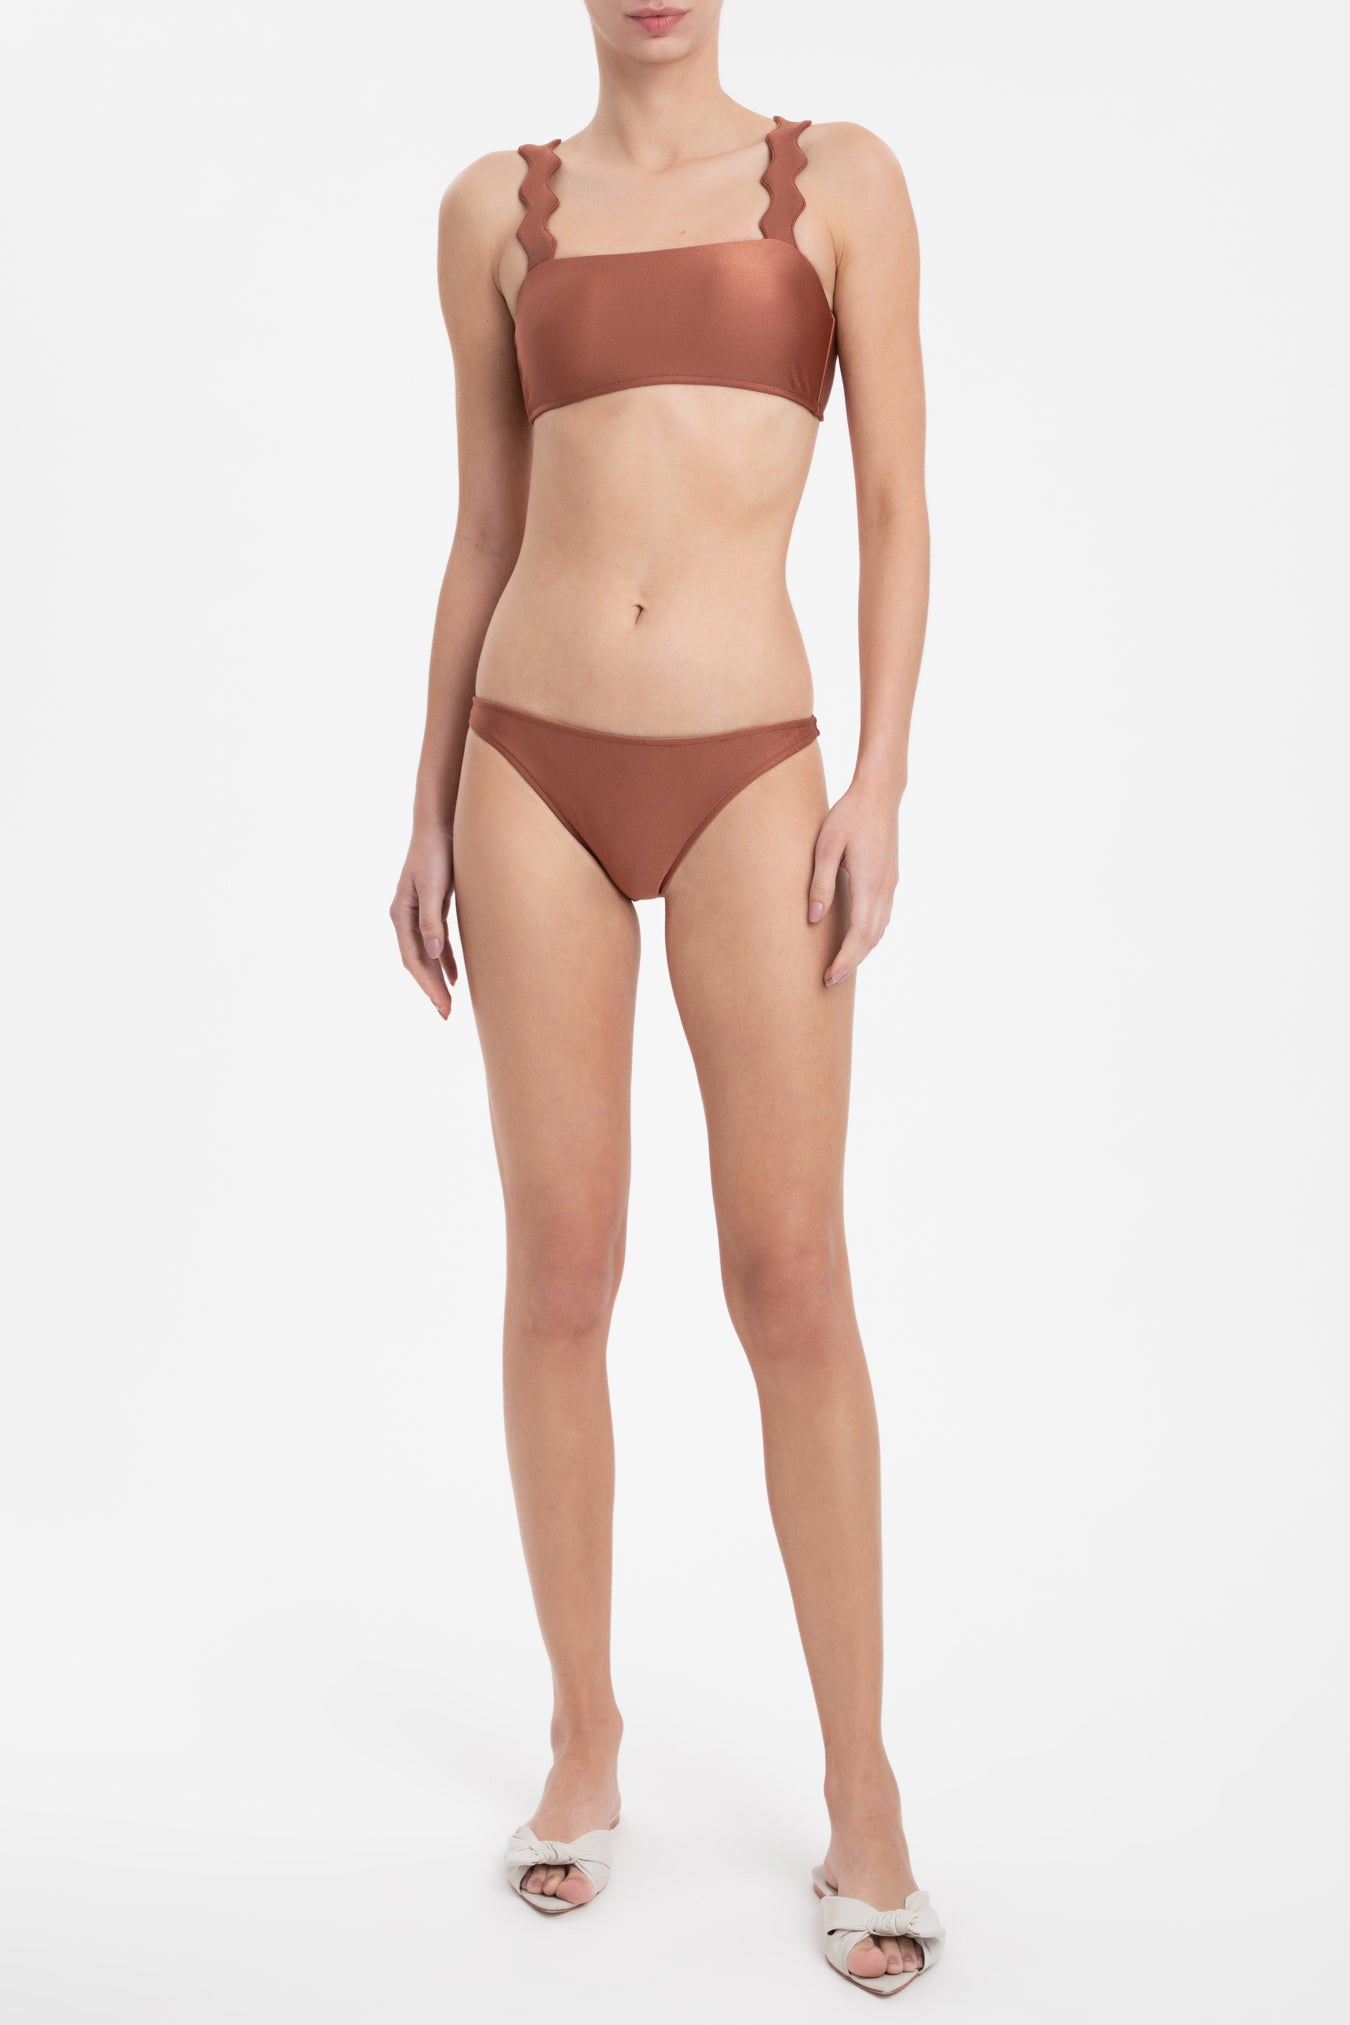 Moves Brown Cropped Bikini With Straps Front